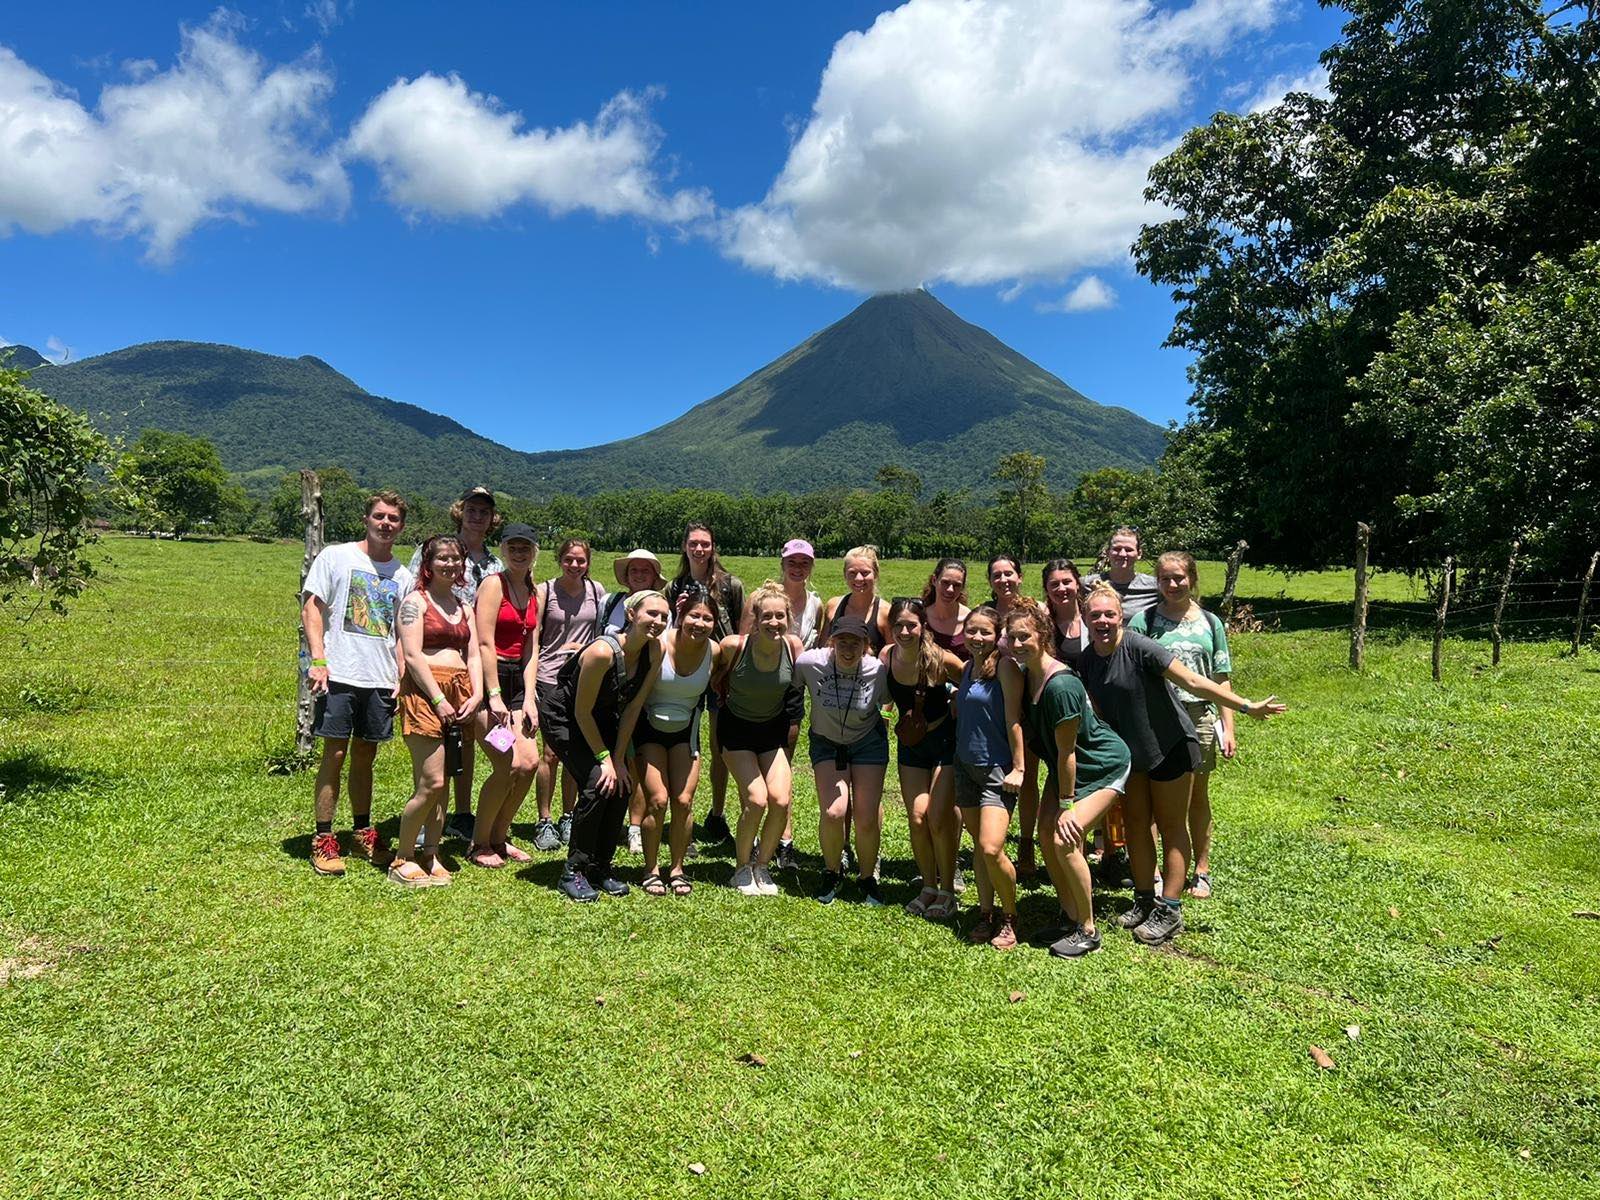 A group of students with the Arenal Volcano in the background in Costa Rica